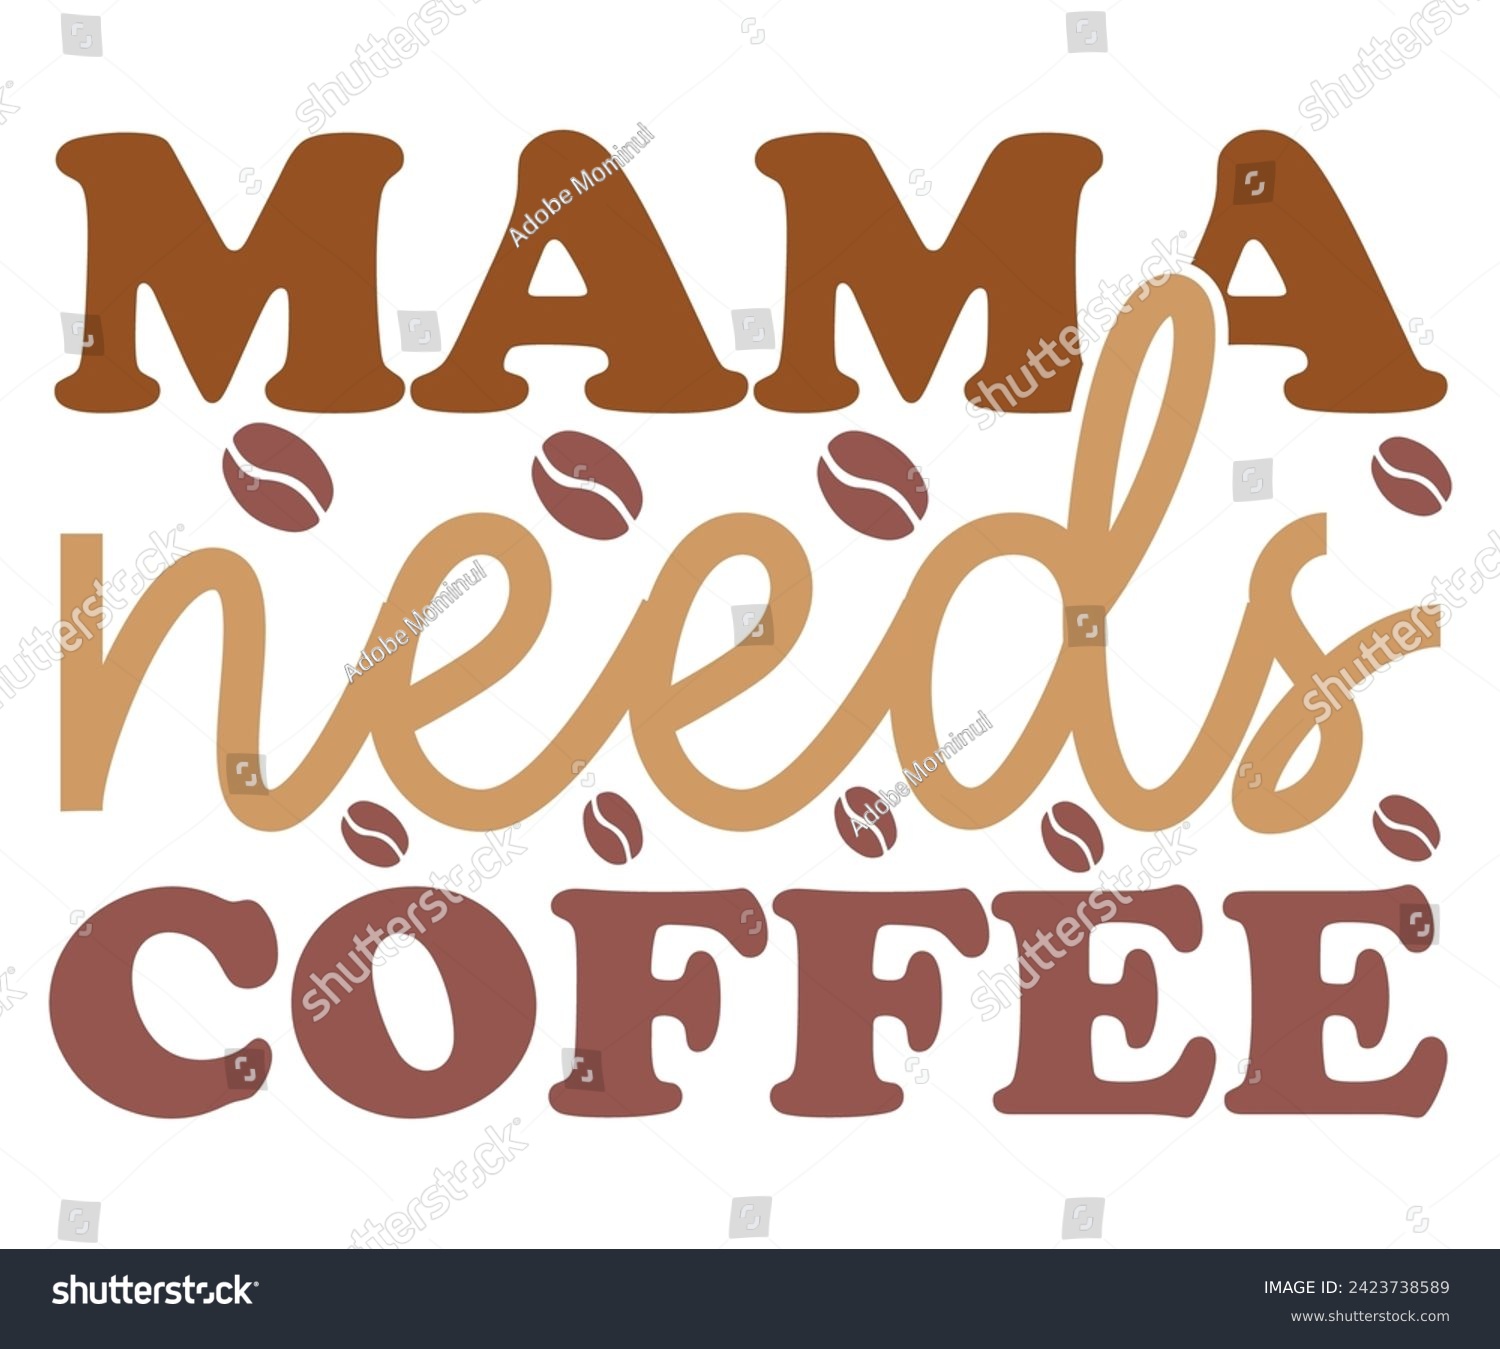 SVG of Mama Needs Coffee Svg,Coffee Svg,Coffee Retro,Funny Coffee Sayings,Coffee Mug Svg,Coffee Cup Svg,Gift For Coffee,Coffee Lover,Caffeine Svg,Svg Cut File,Coffee Quotes,Sublimation Design, svg